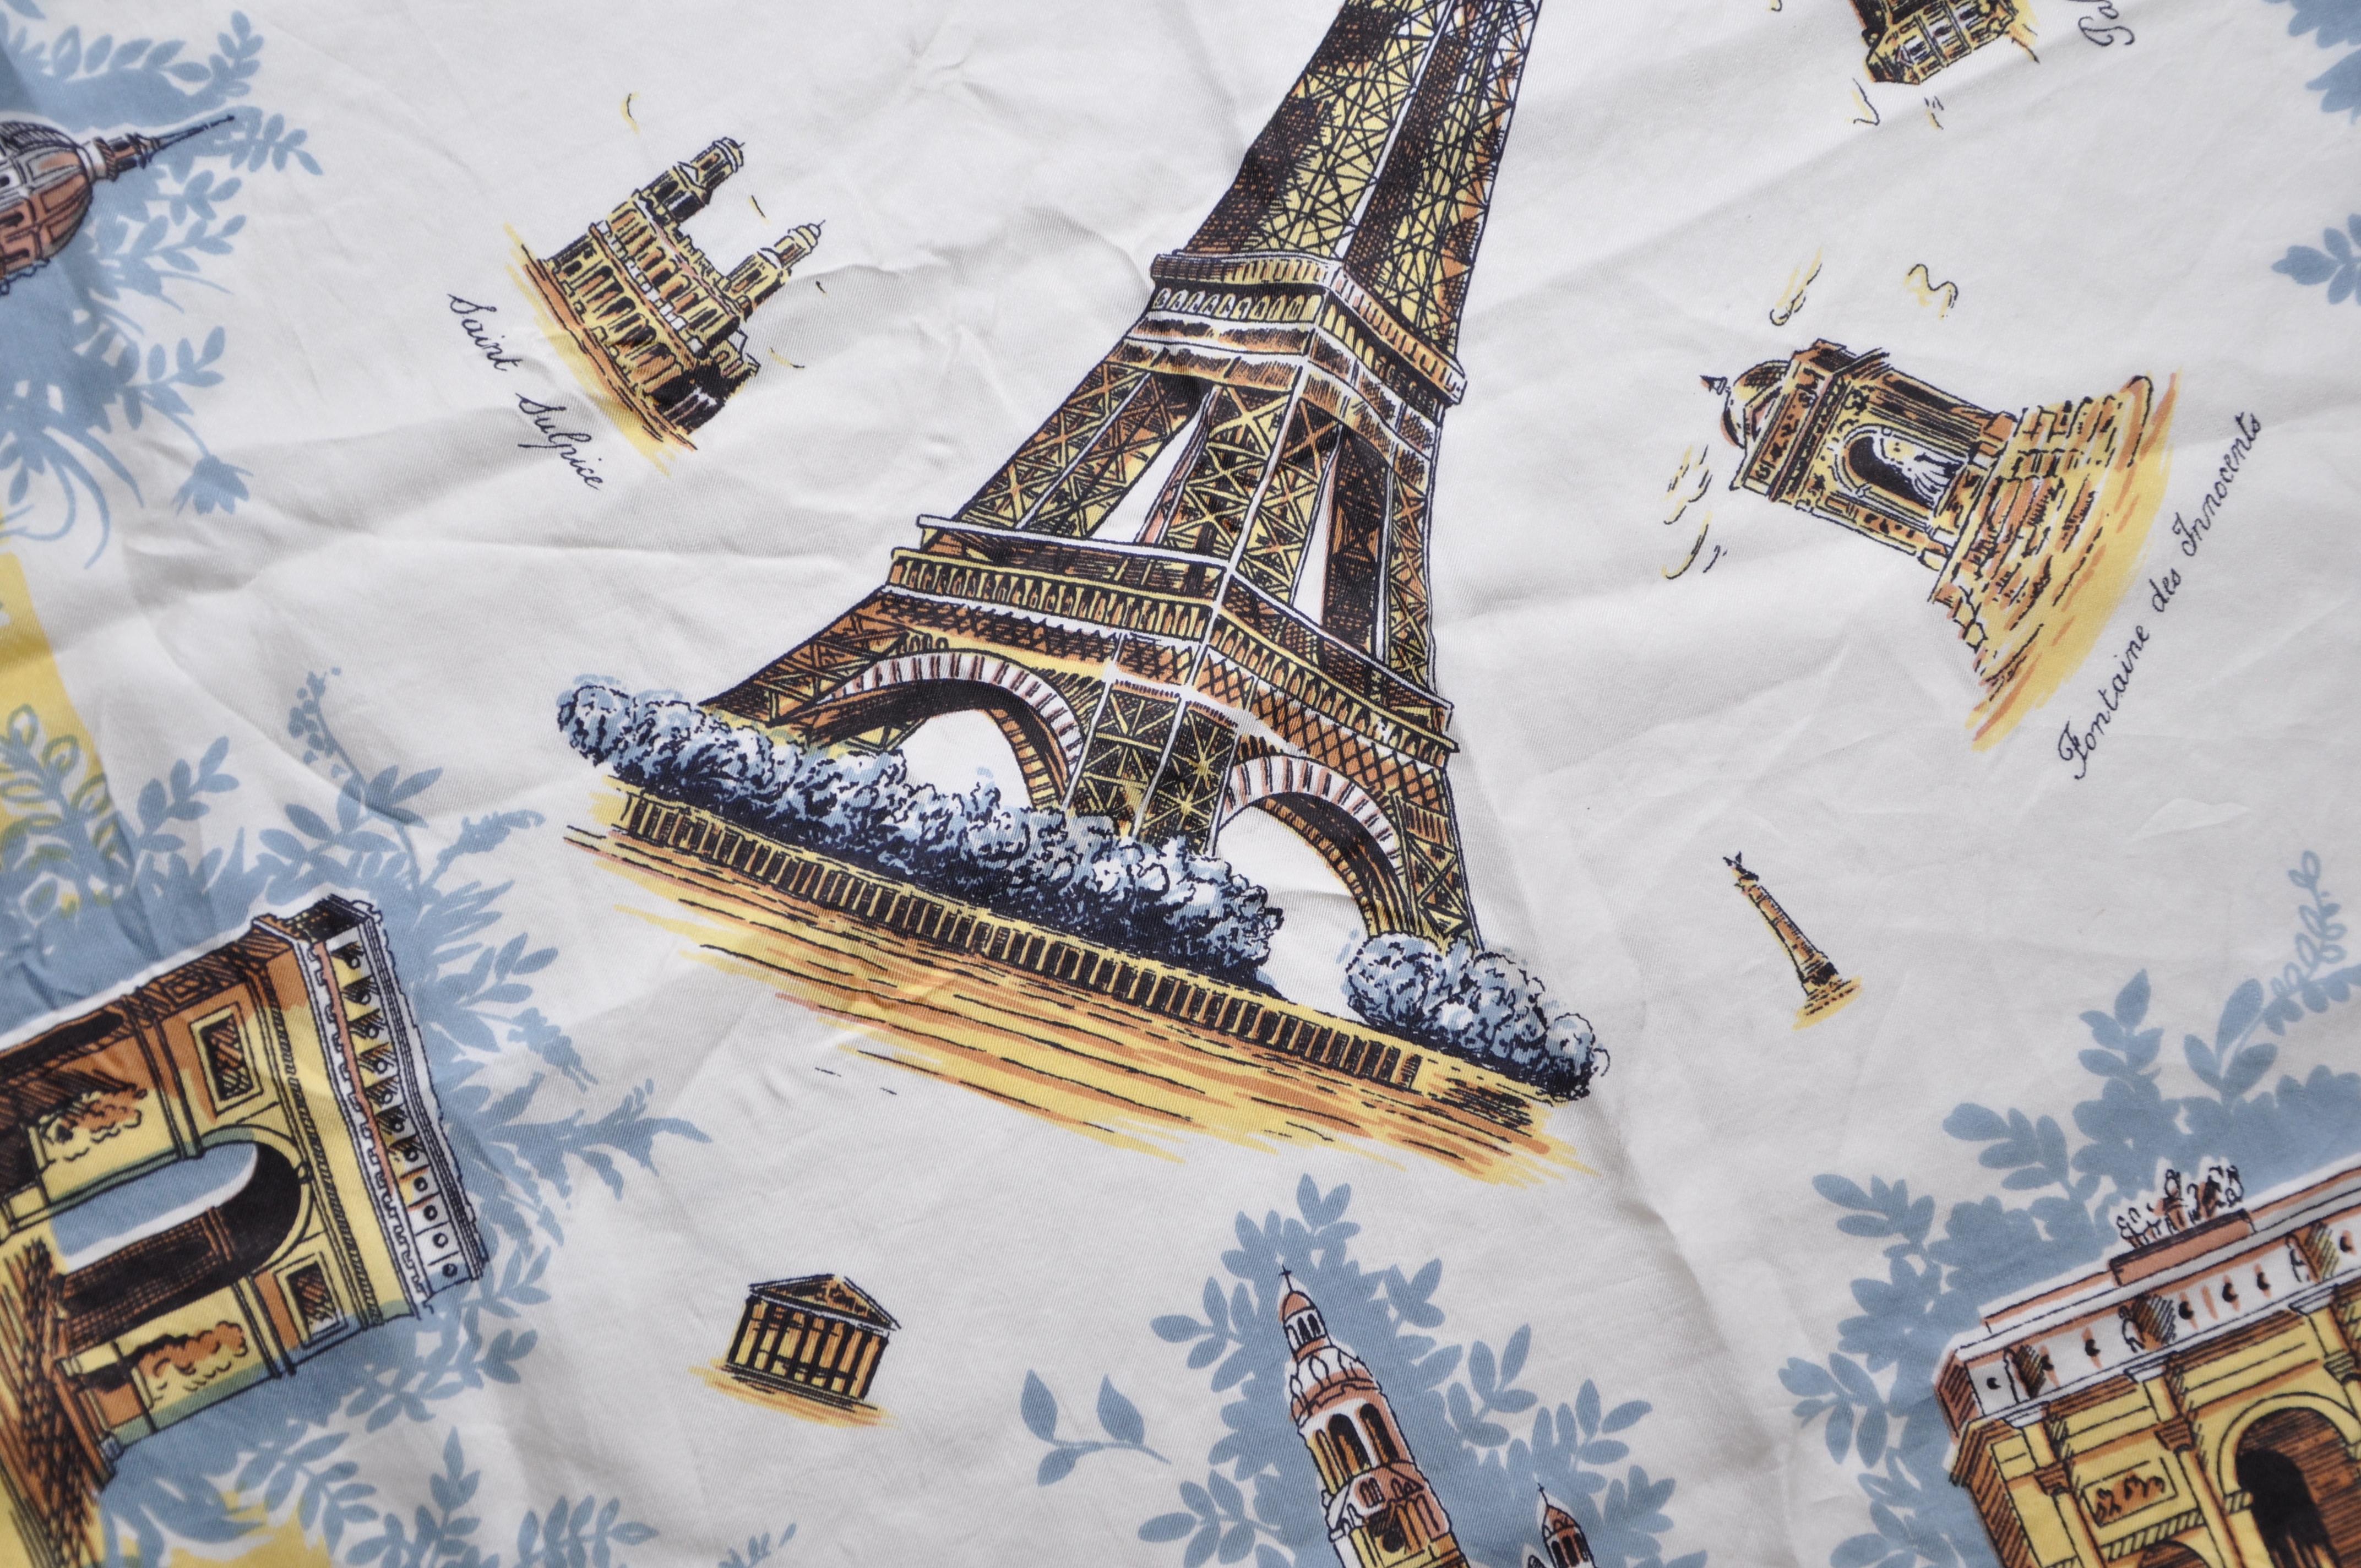 Title:
Large Vintage Silk Scarf Pale Blue

Description:

Beautiful and rare vintage designer silk scarf.

Very pretty with multiple detailed picturesque pictures going on. 

It is essentially a tourist themed scarf, but in the upmost sophisticated